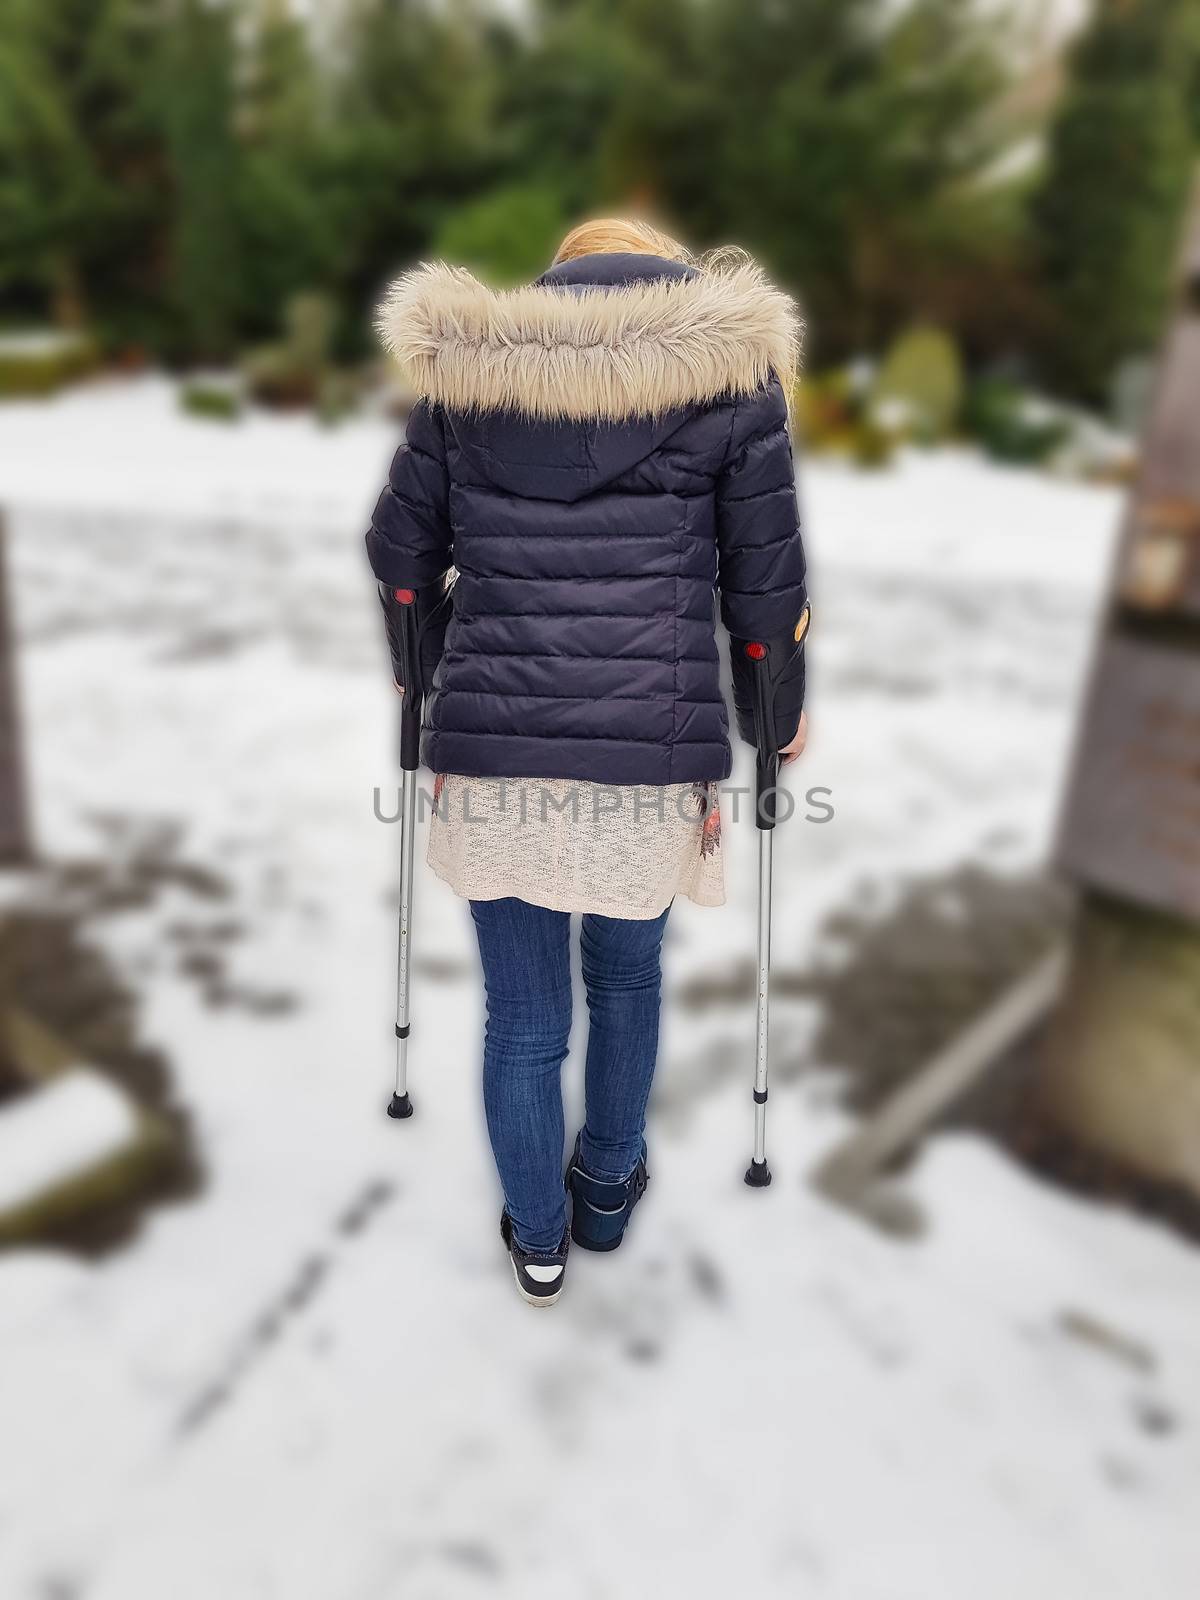 Woman walking on crutches in the park